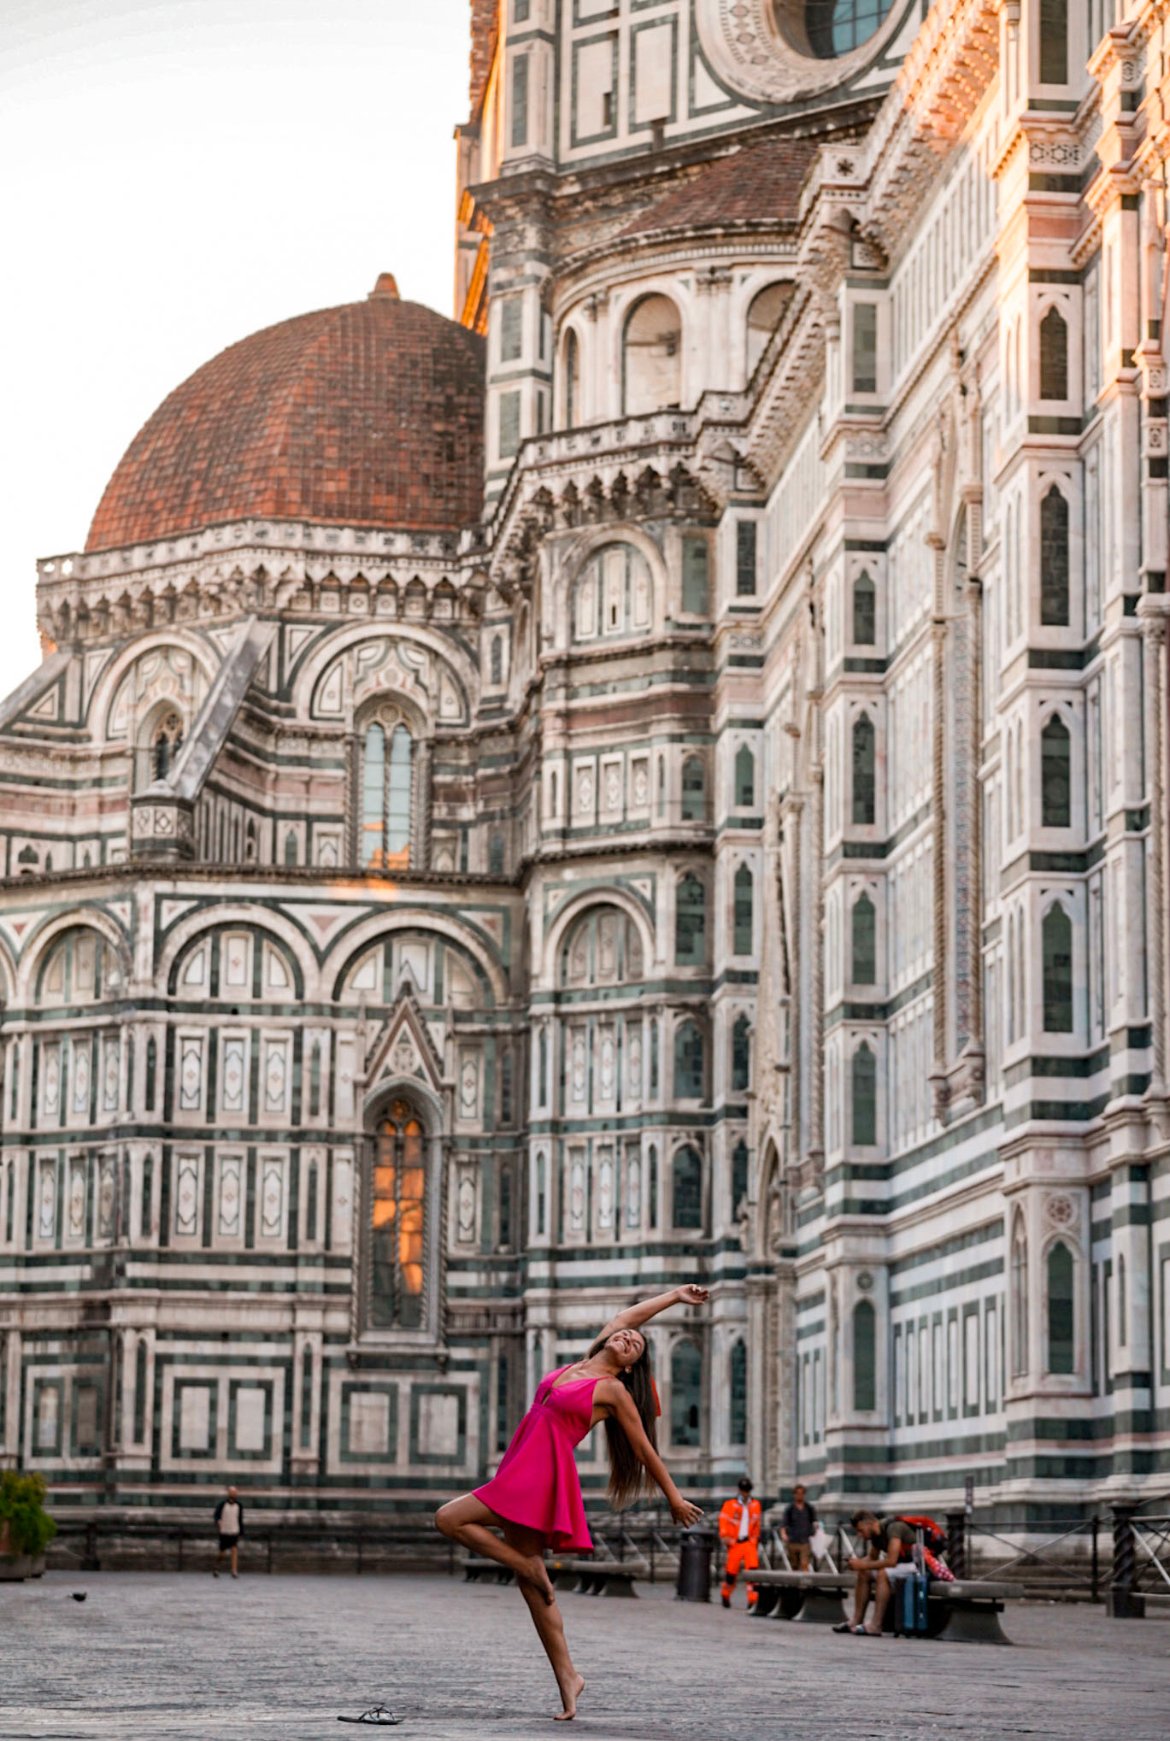 Duomo, things to see in Florence